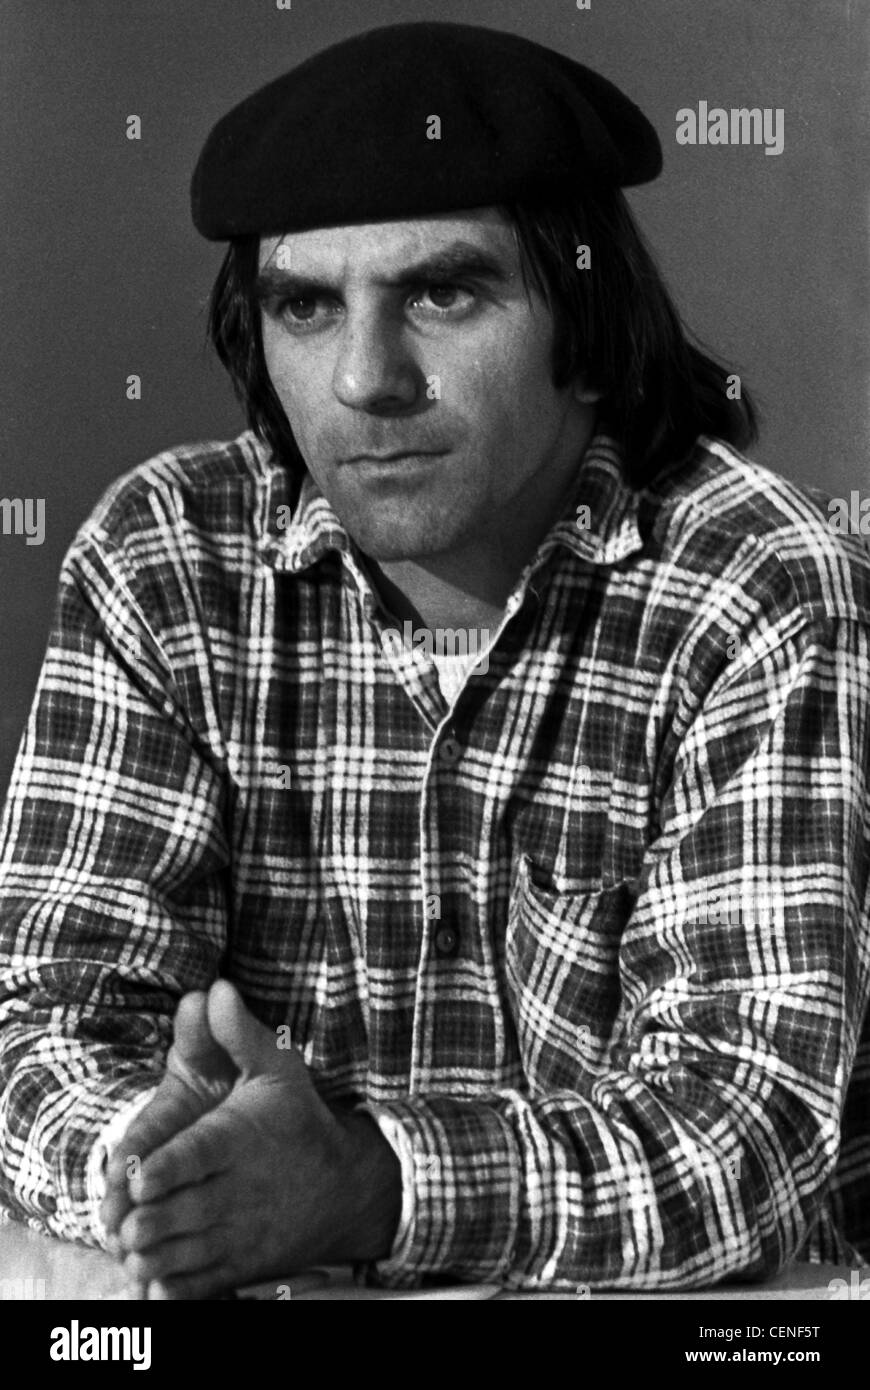 Rudi Dutschke - * 07.03.1940 - 24.12.1979: Portrait of the Berlin student leader and politician at a press conference. Stock Photo